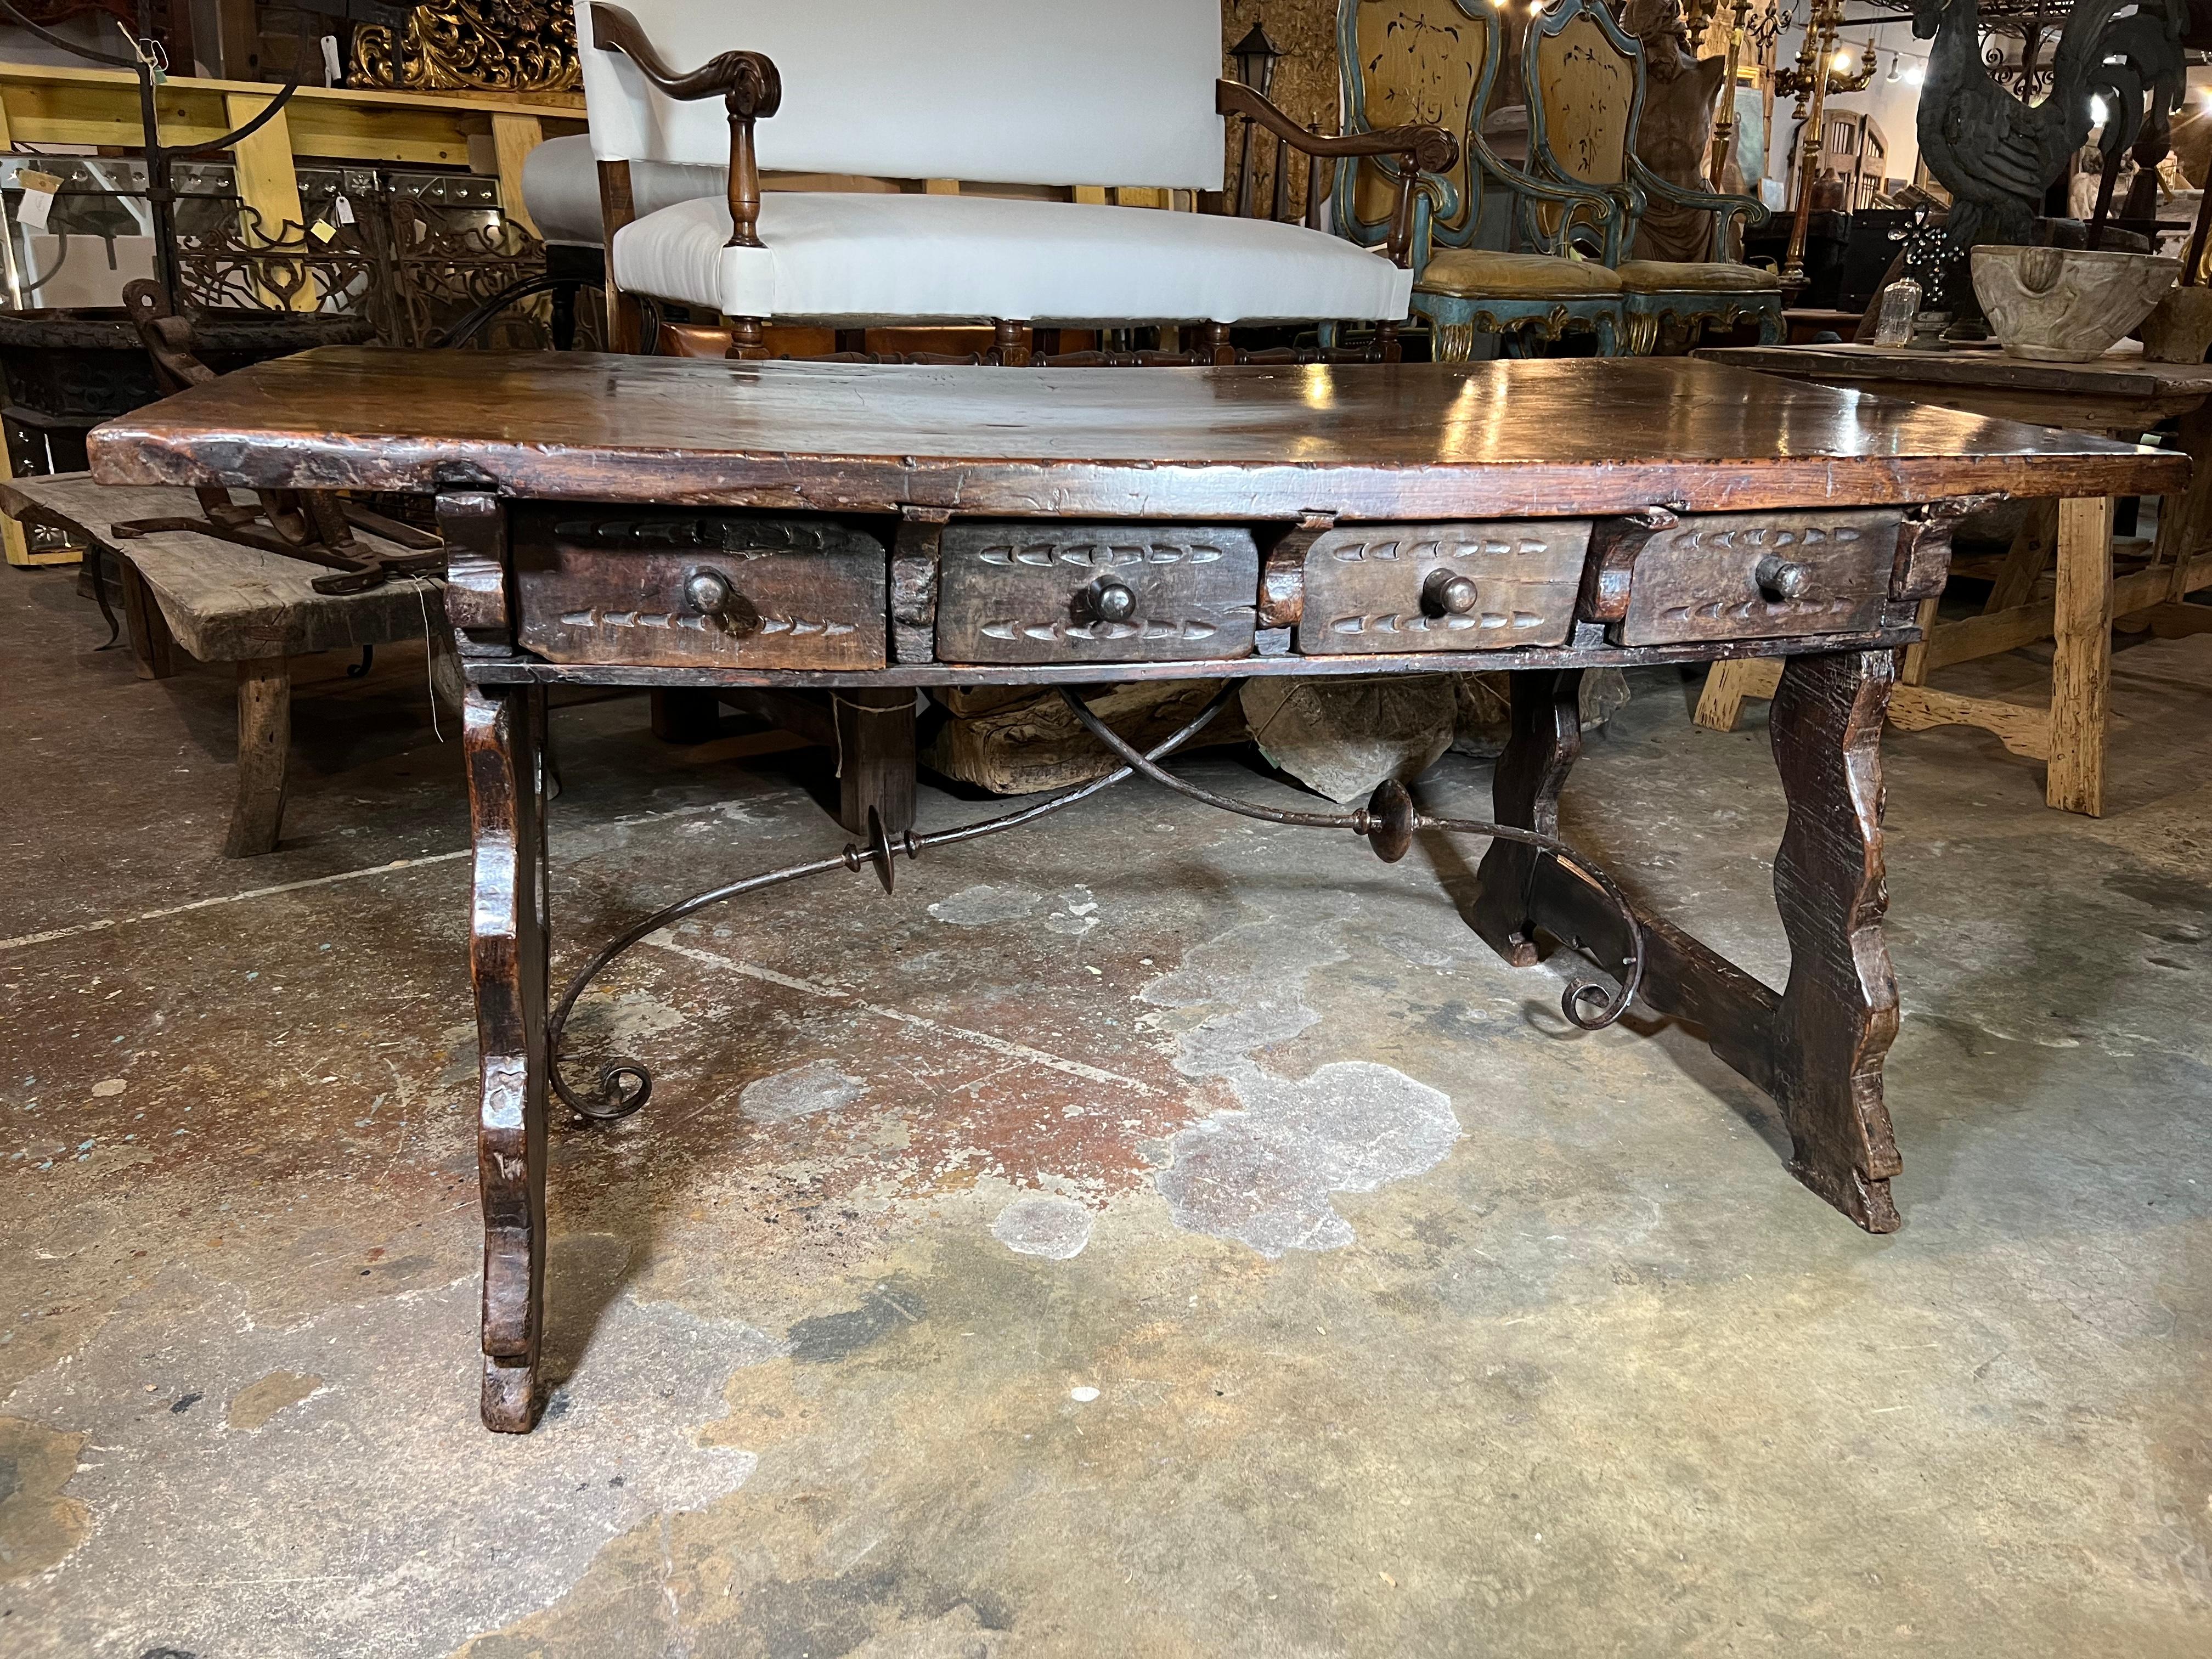 A very fine mid-18th century desk from the Catalan region of Spain. This wonderful desk is beautifully constructed from walnut and hand-forged iron stretchers. The plateau is a solid board - wonderful patina - very rich and luminous. A terrific